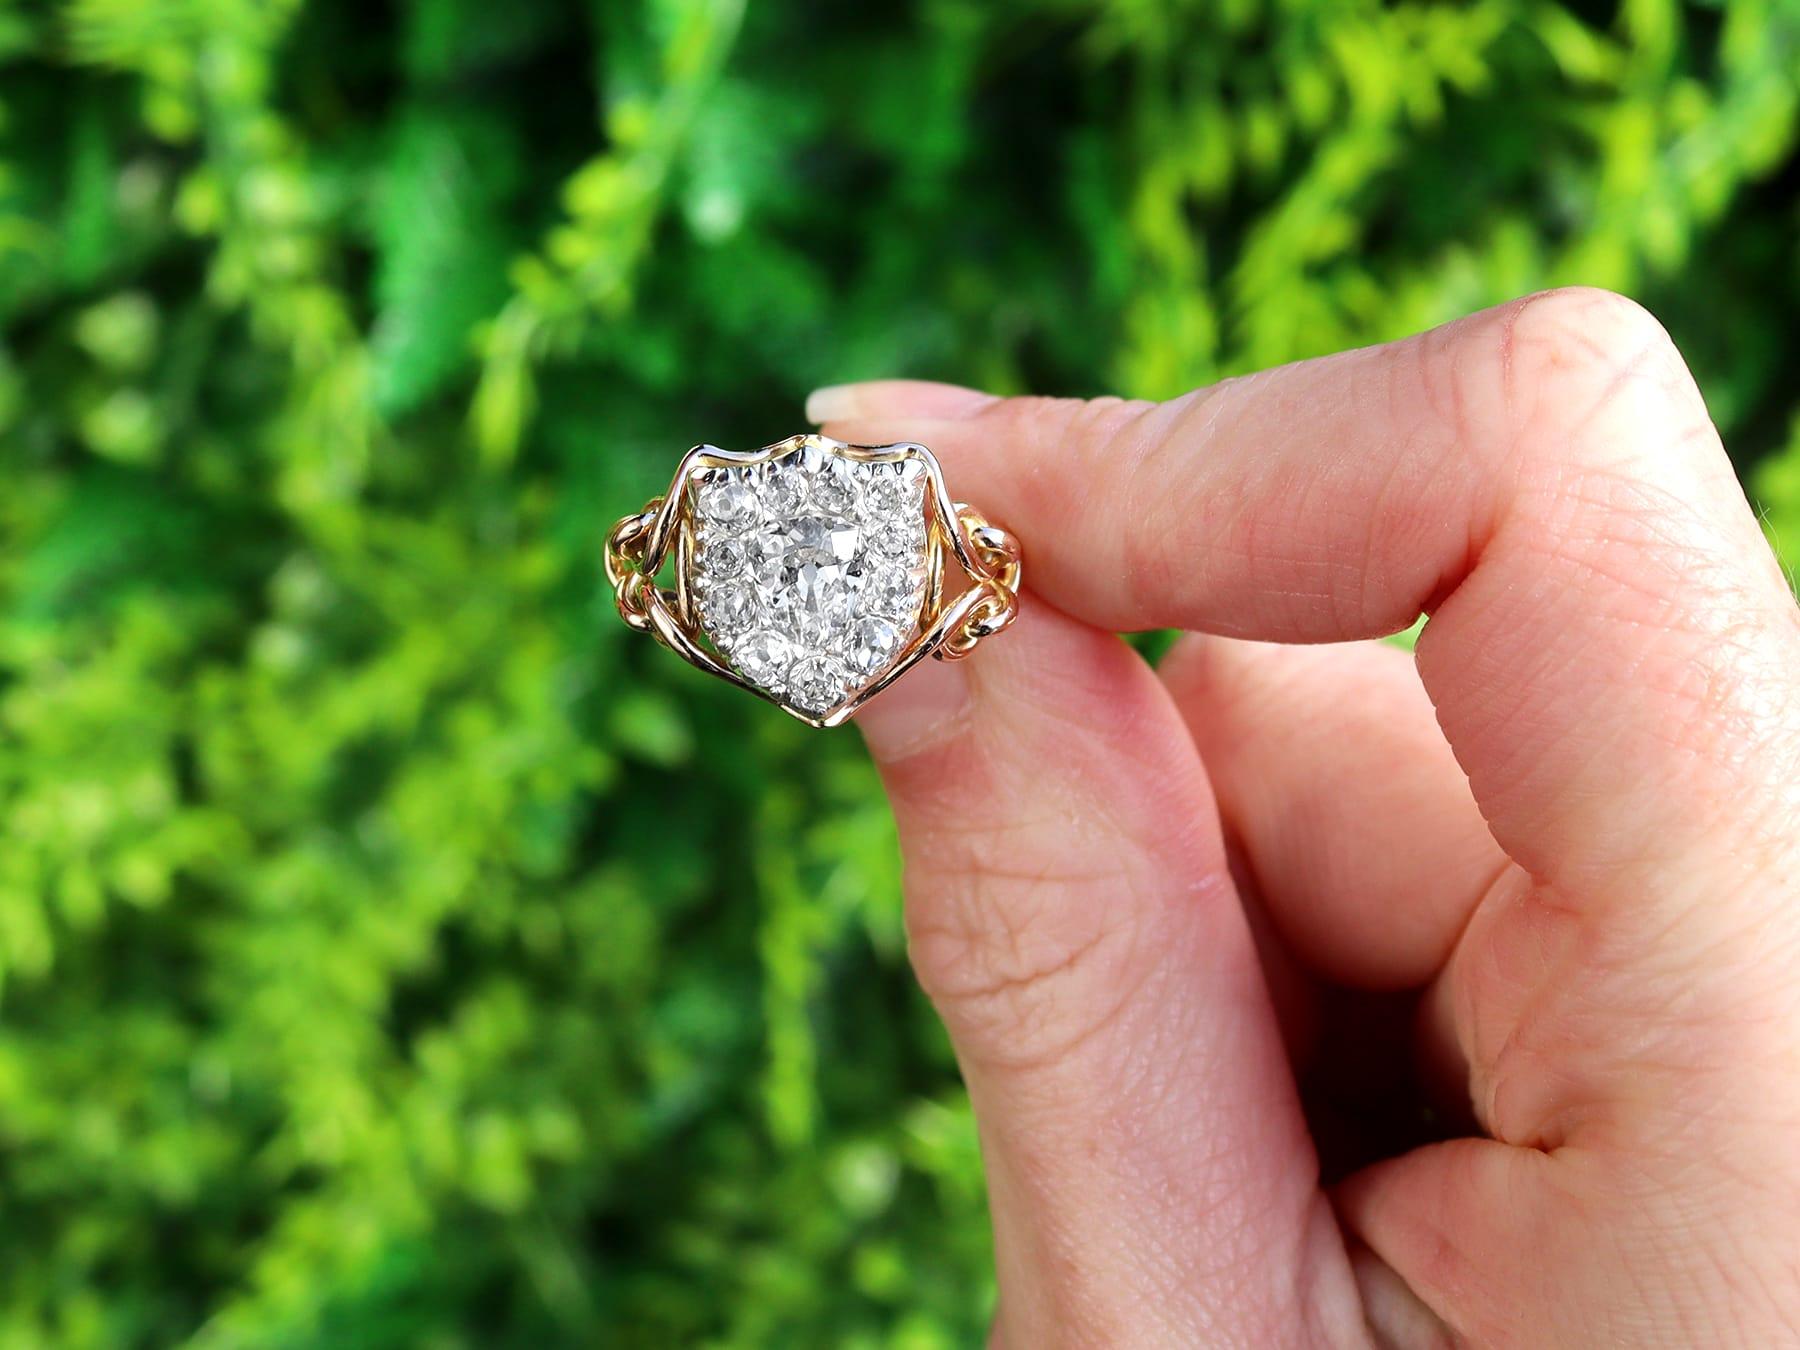 A stunning, fine and impressive antique Victorian 2.05 carat diamond and 18 karat yellow gold, silver set dress ring; part of our diverse 1890s jewellery and estate jewelry collections.

This stunning, fine and impressive antique Victorian ring has